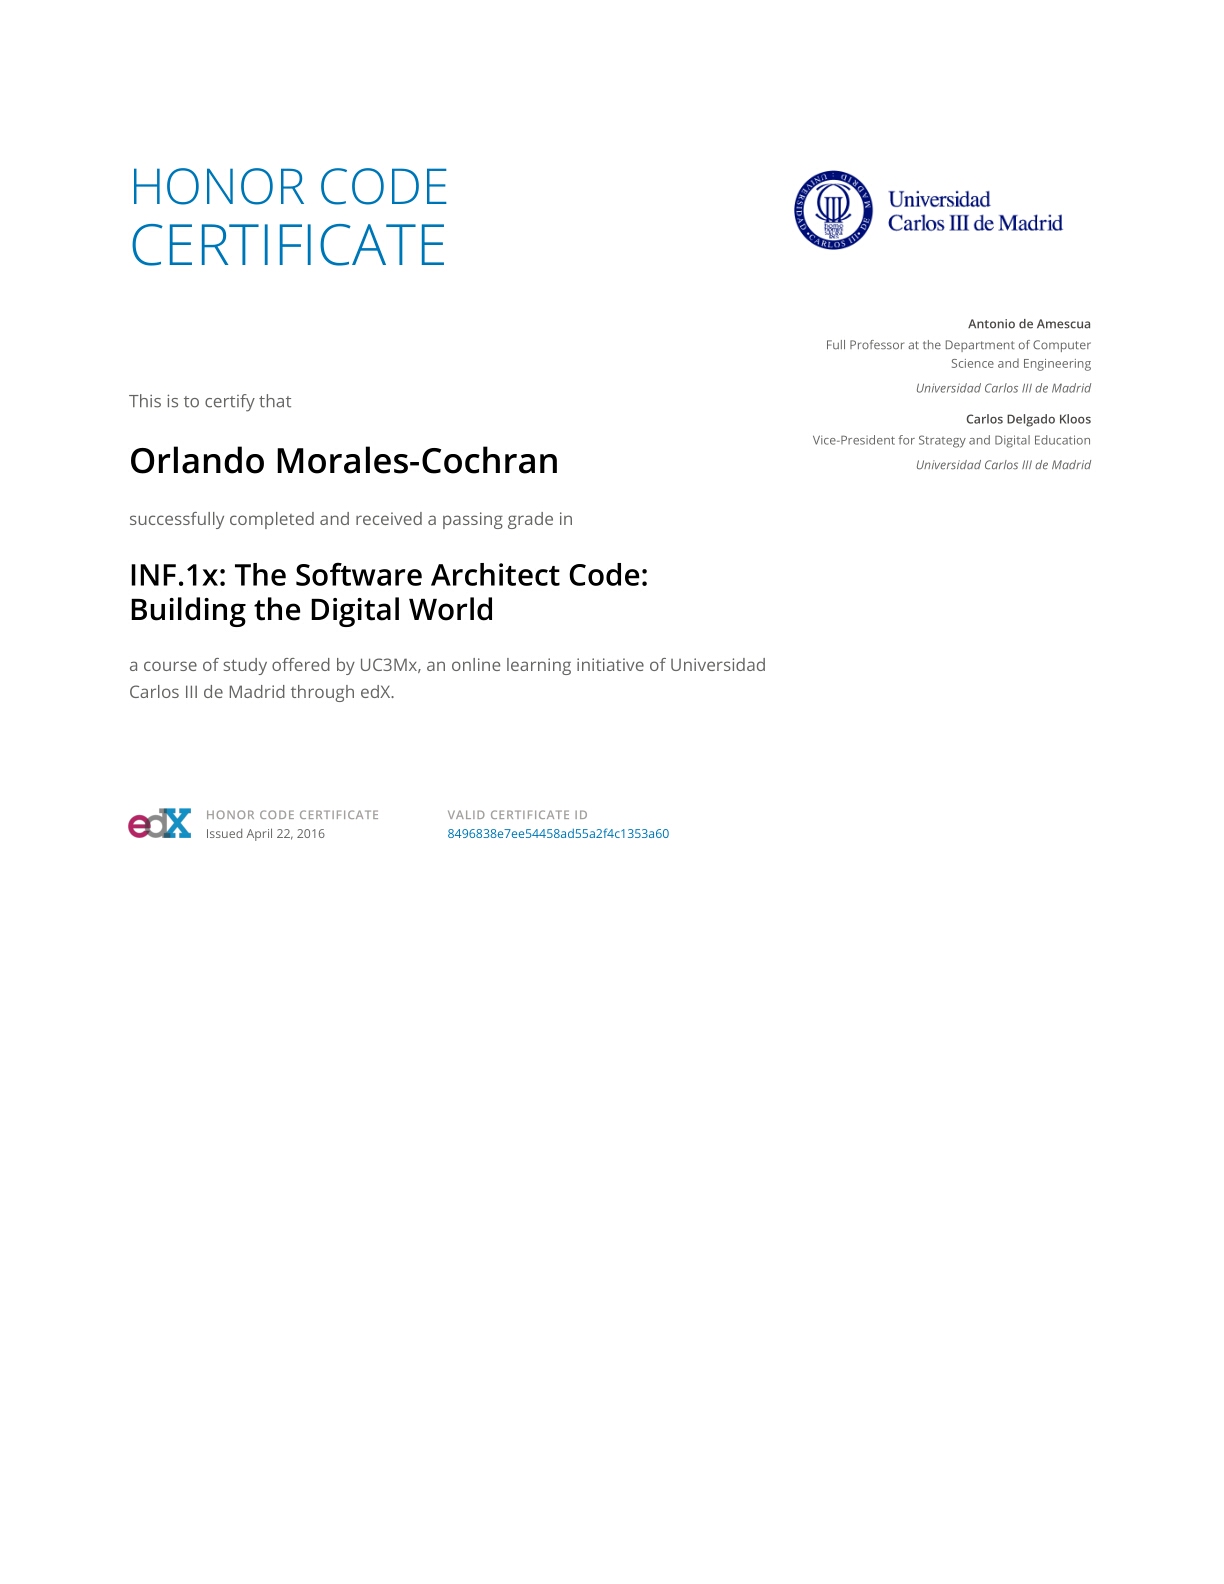 edX - The Software Architect Code: Building the Digital World Certificate of Course Completion with Passing Grade